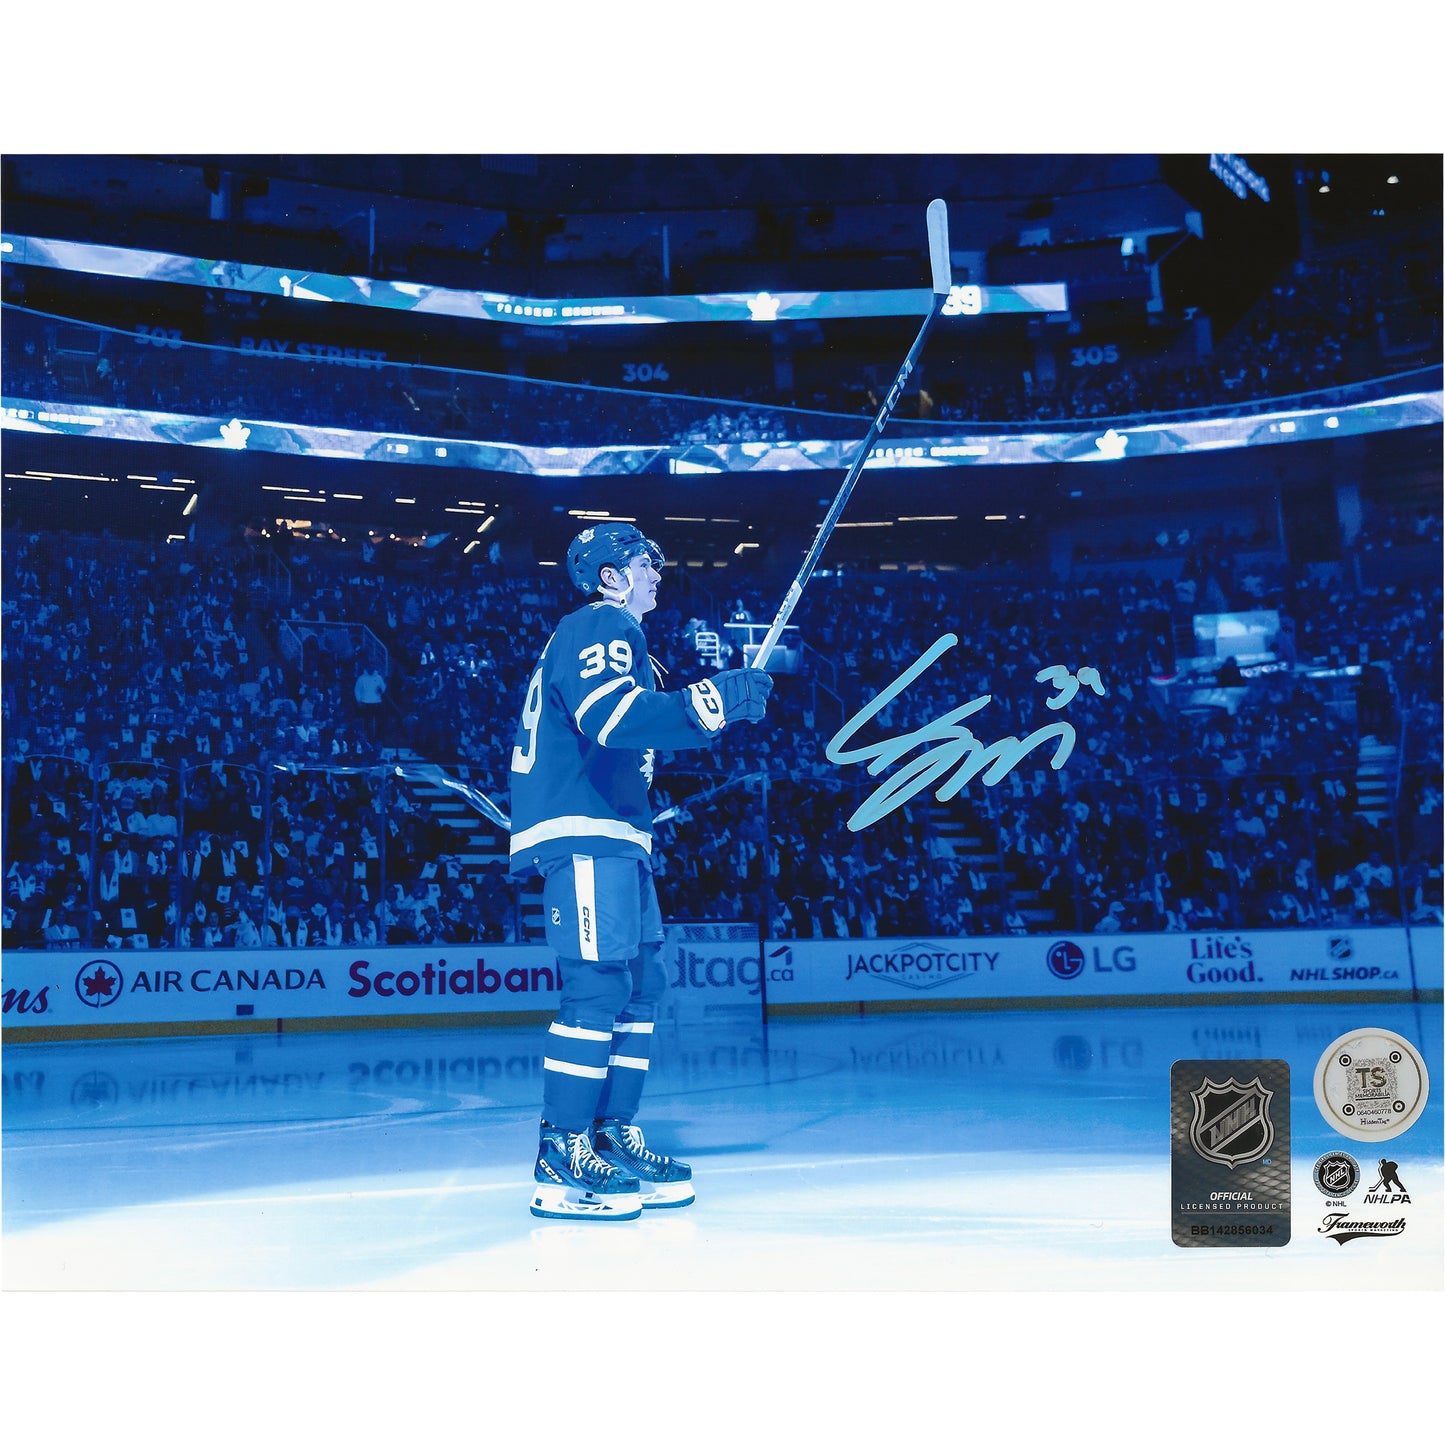 Fraser Minten Autographed Toronto Maple Leafs NHL Debut Introduction 8x10 Photo